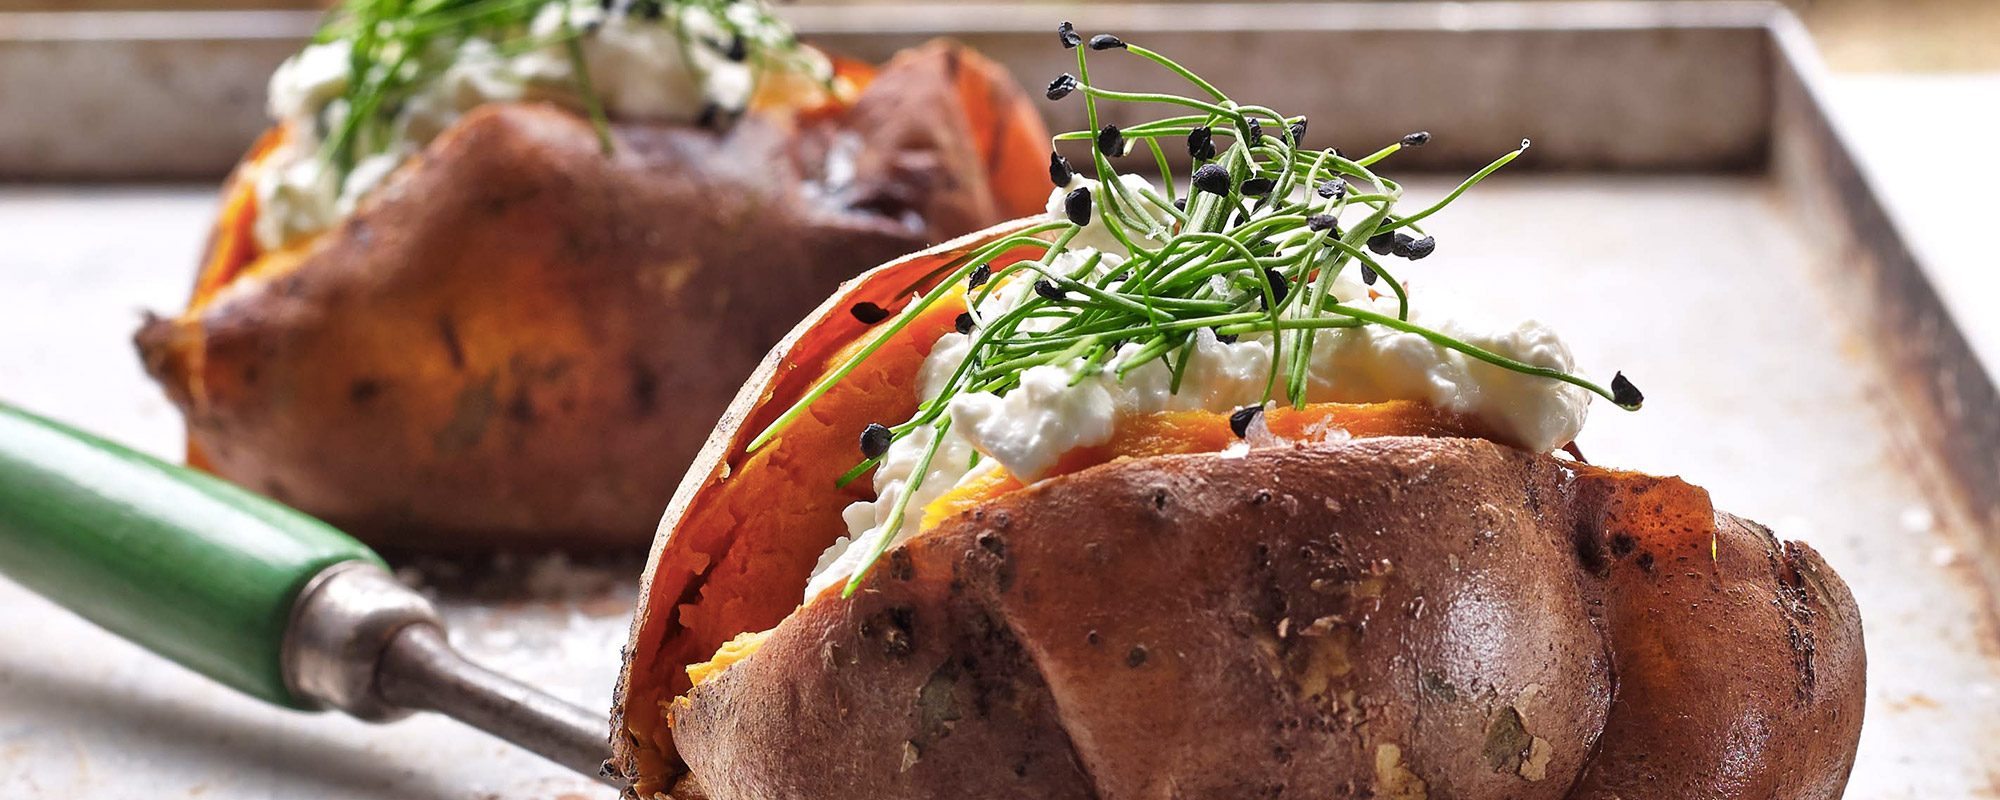 Recipe Sweet Jacket Potato With Cottage Cheese And Garlic Chives